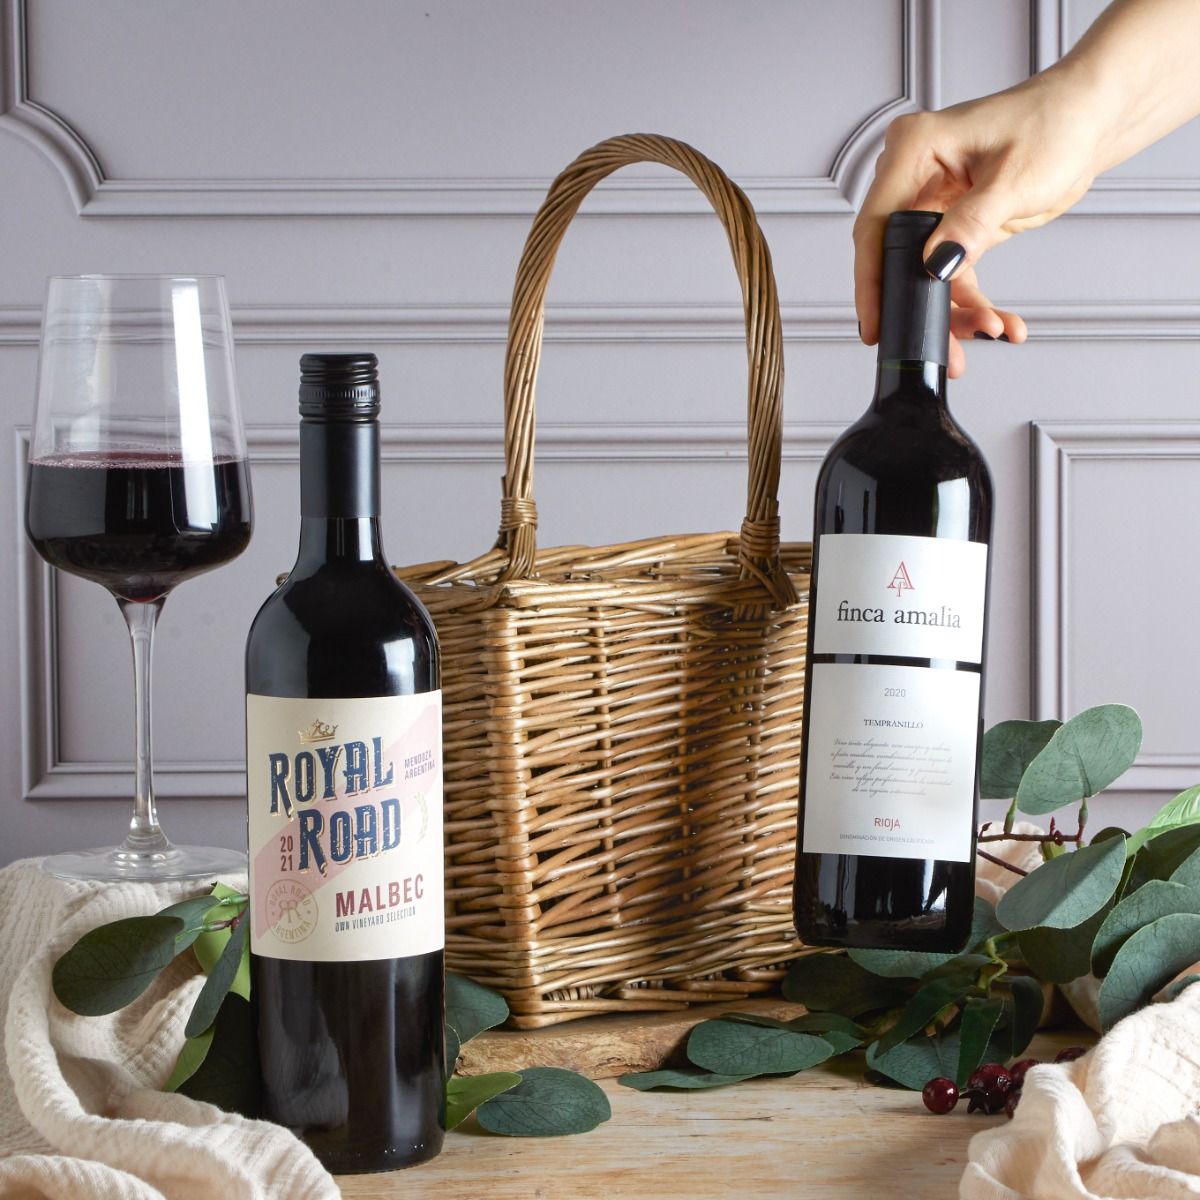 Red Wine Duo Gift Basket as a Father's Day wine gift suggestions